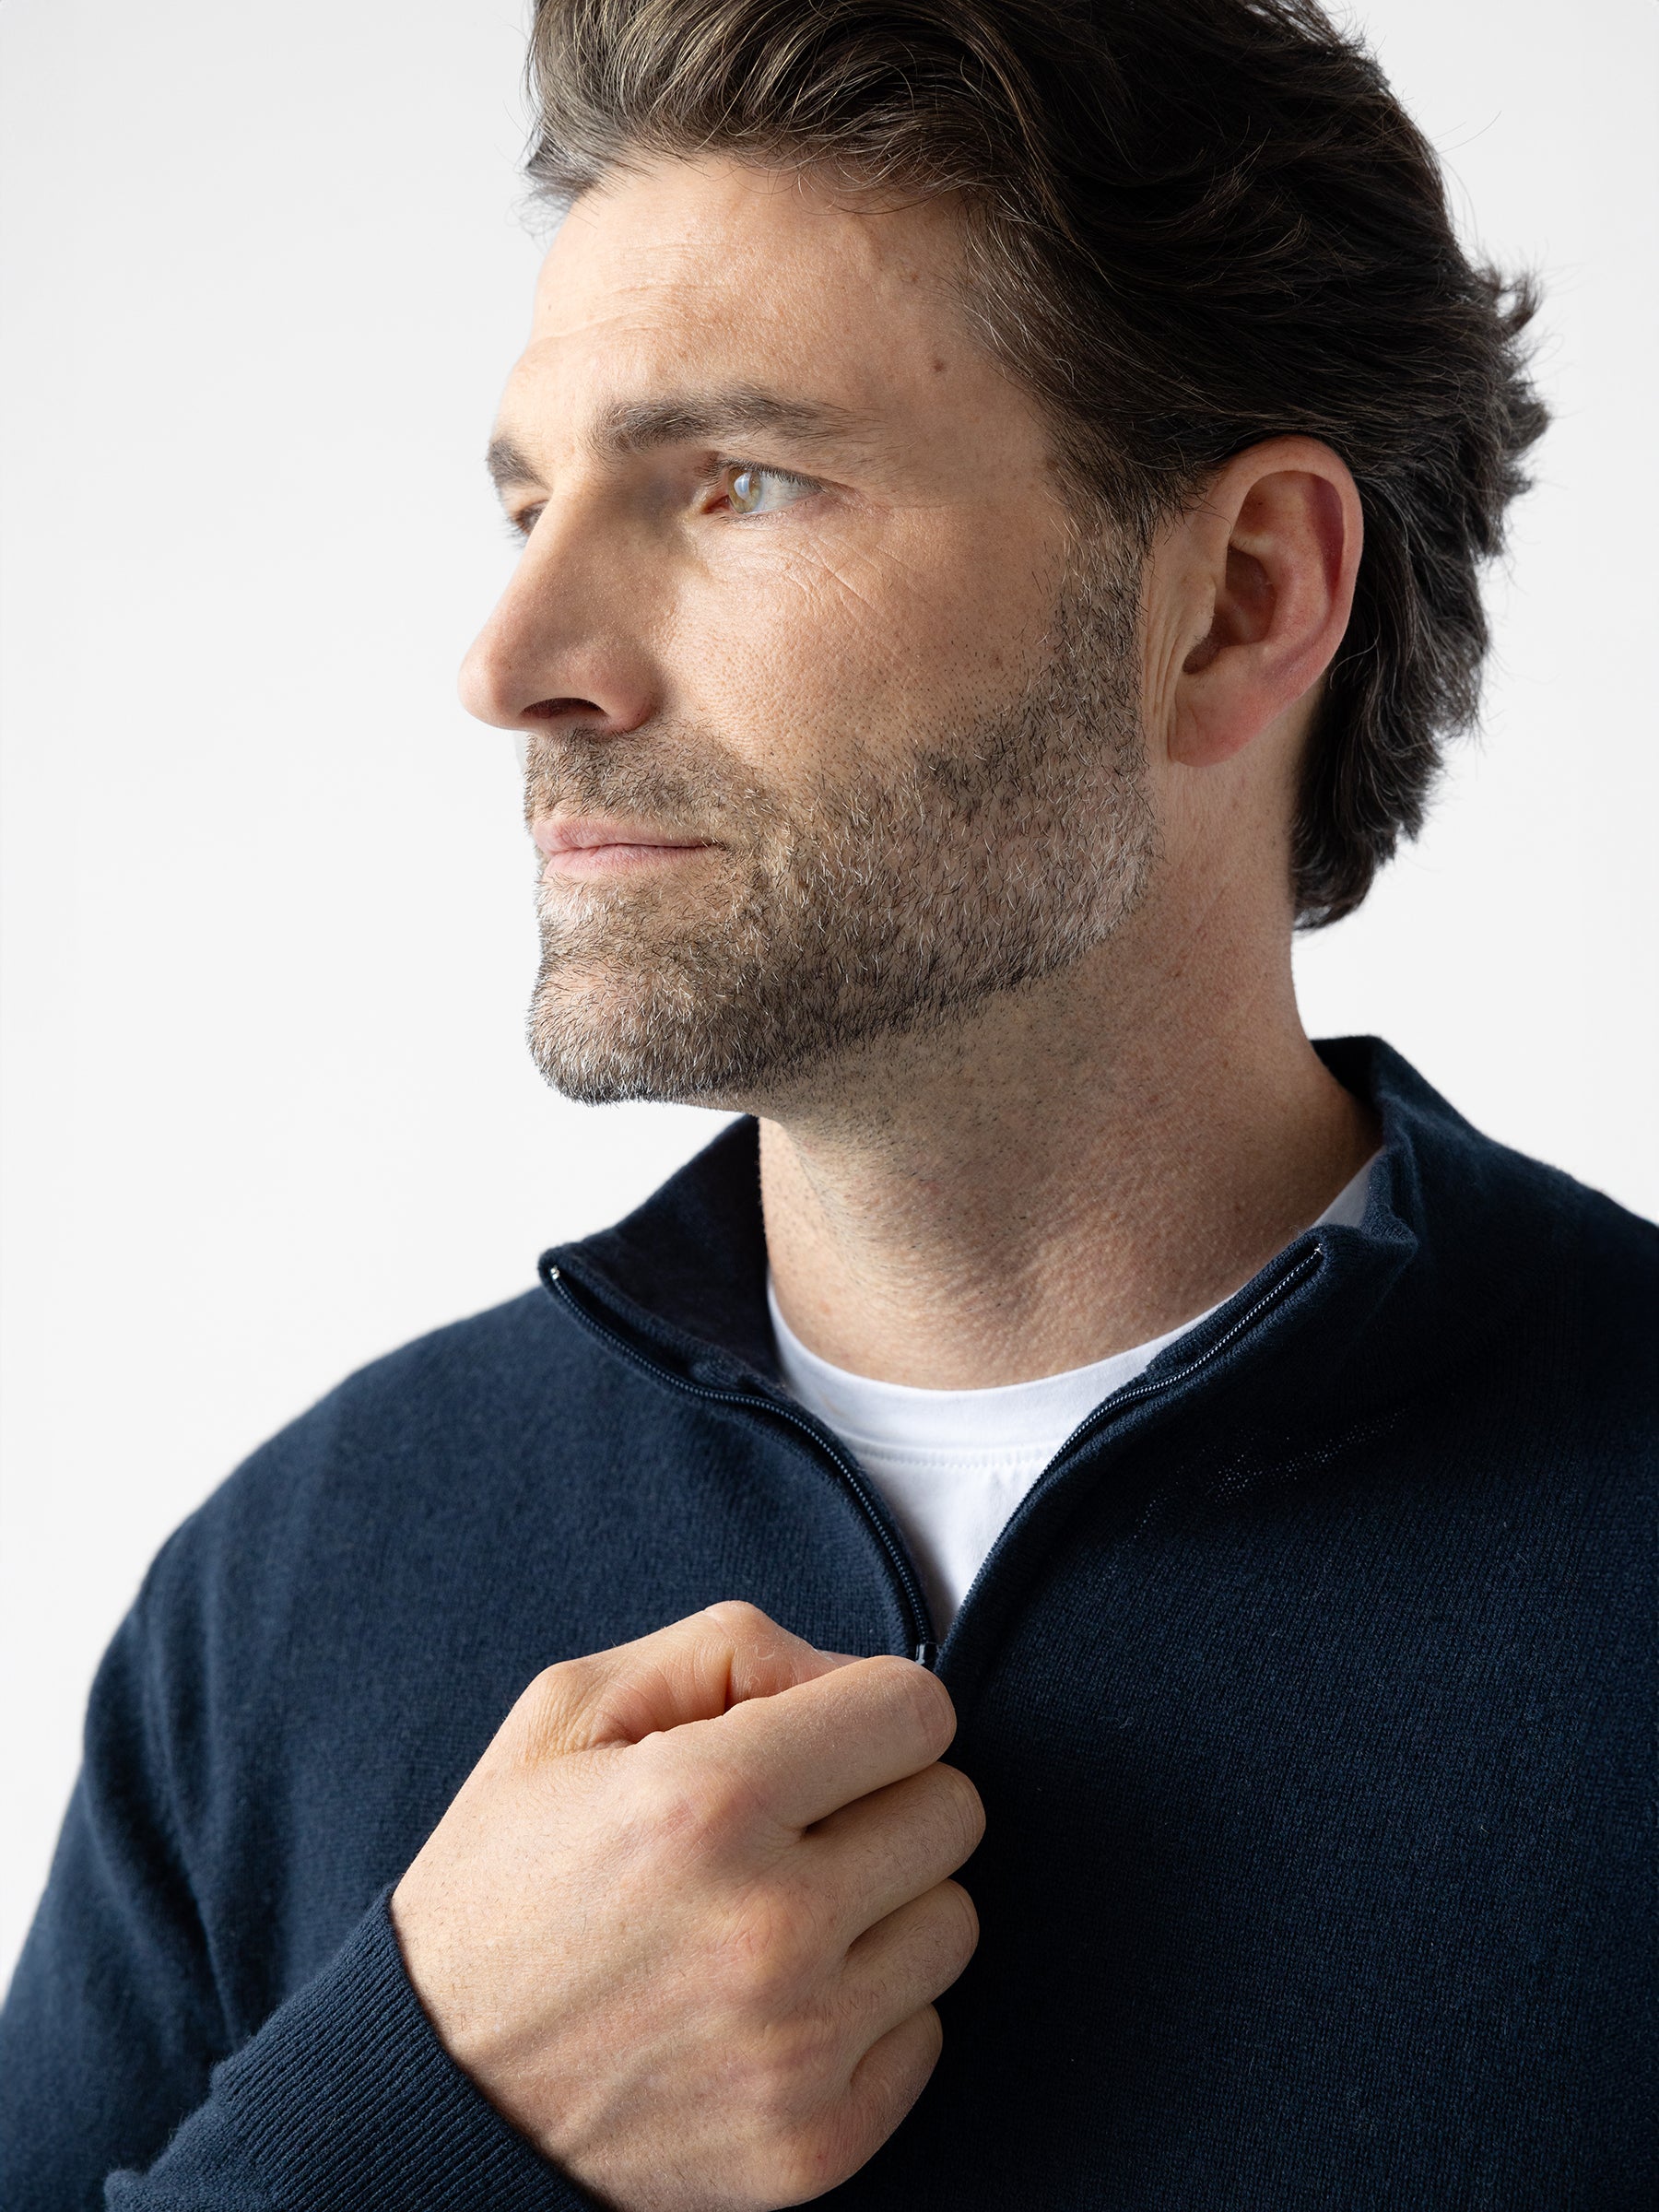 A man with short, dark hair and a beard gazes thoughtfully into the distance. He is dressed in a Cozy Earth Men's Quarter Zip Sweater, which he is partially unzipping with one hand. The plain white background emphasizes his contemplative expression. |Color:Eclipse